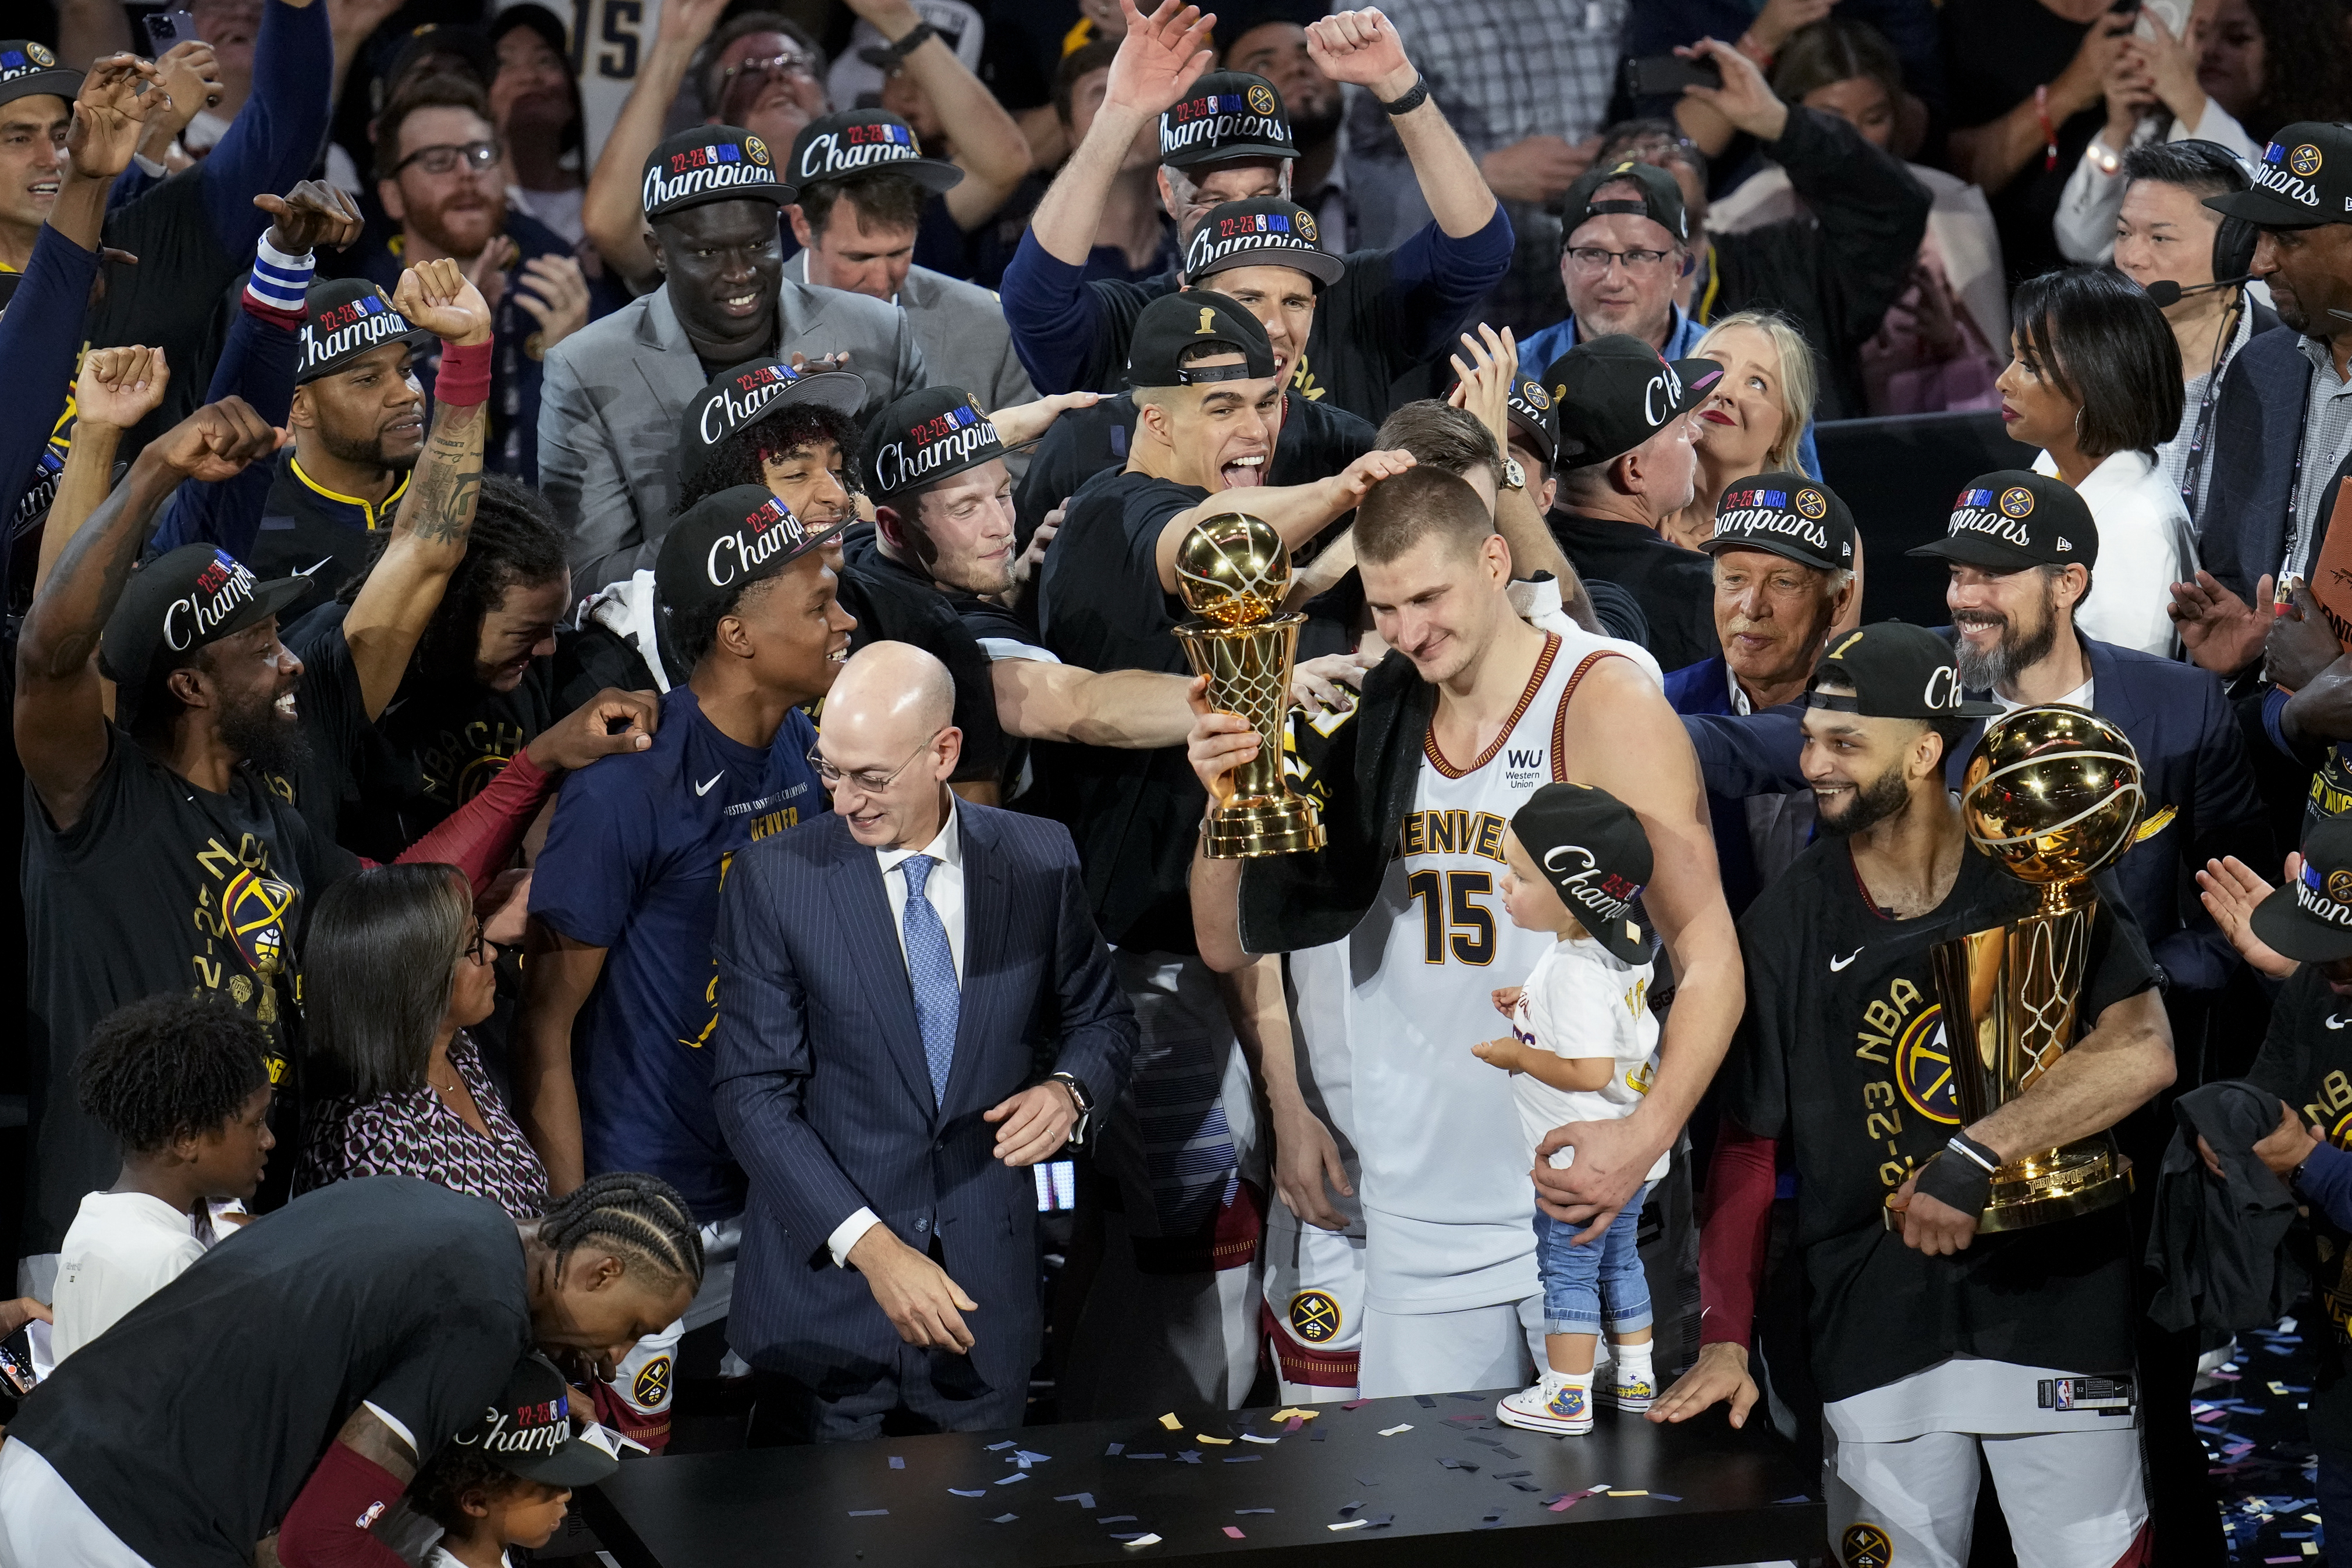 2022 NBA Finals ratings show growth, but still lag historically